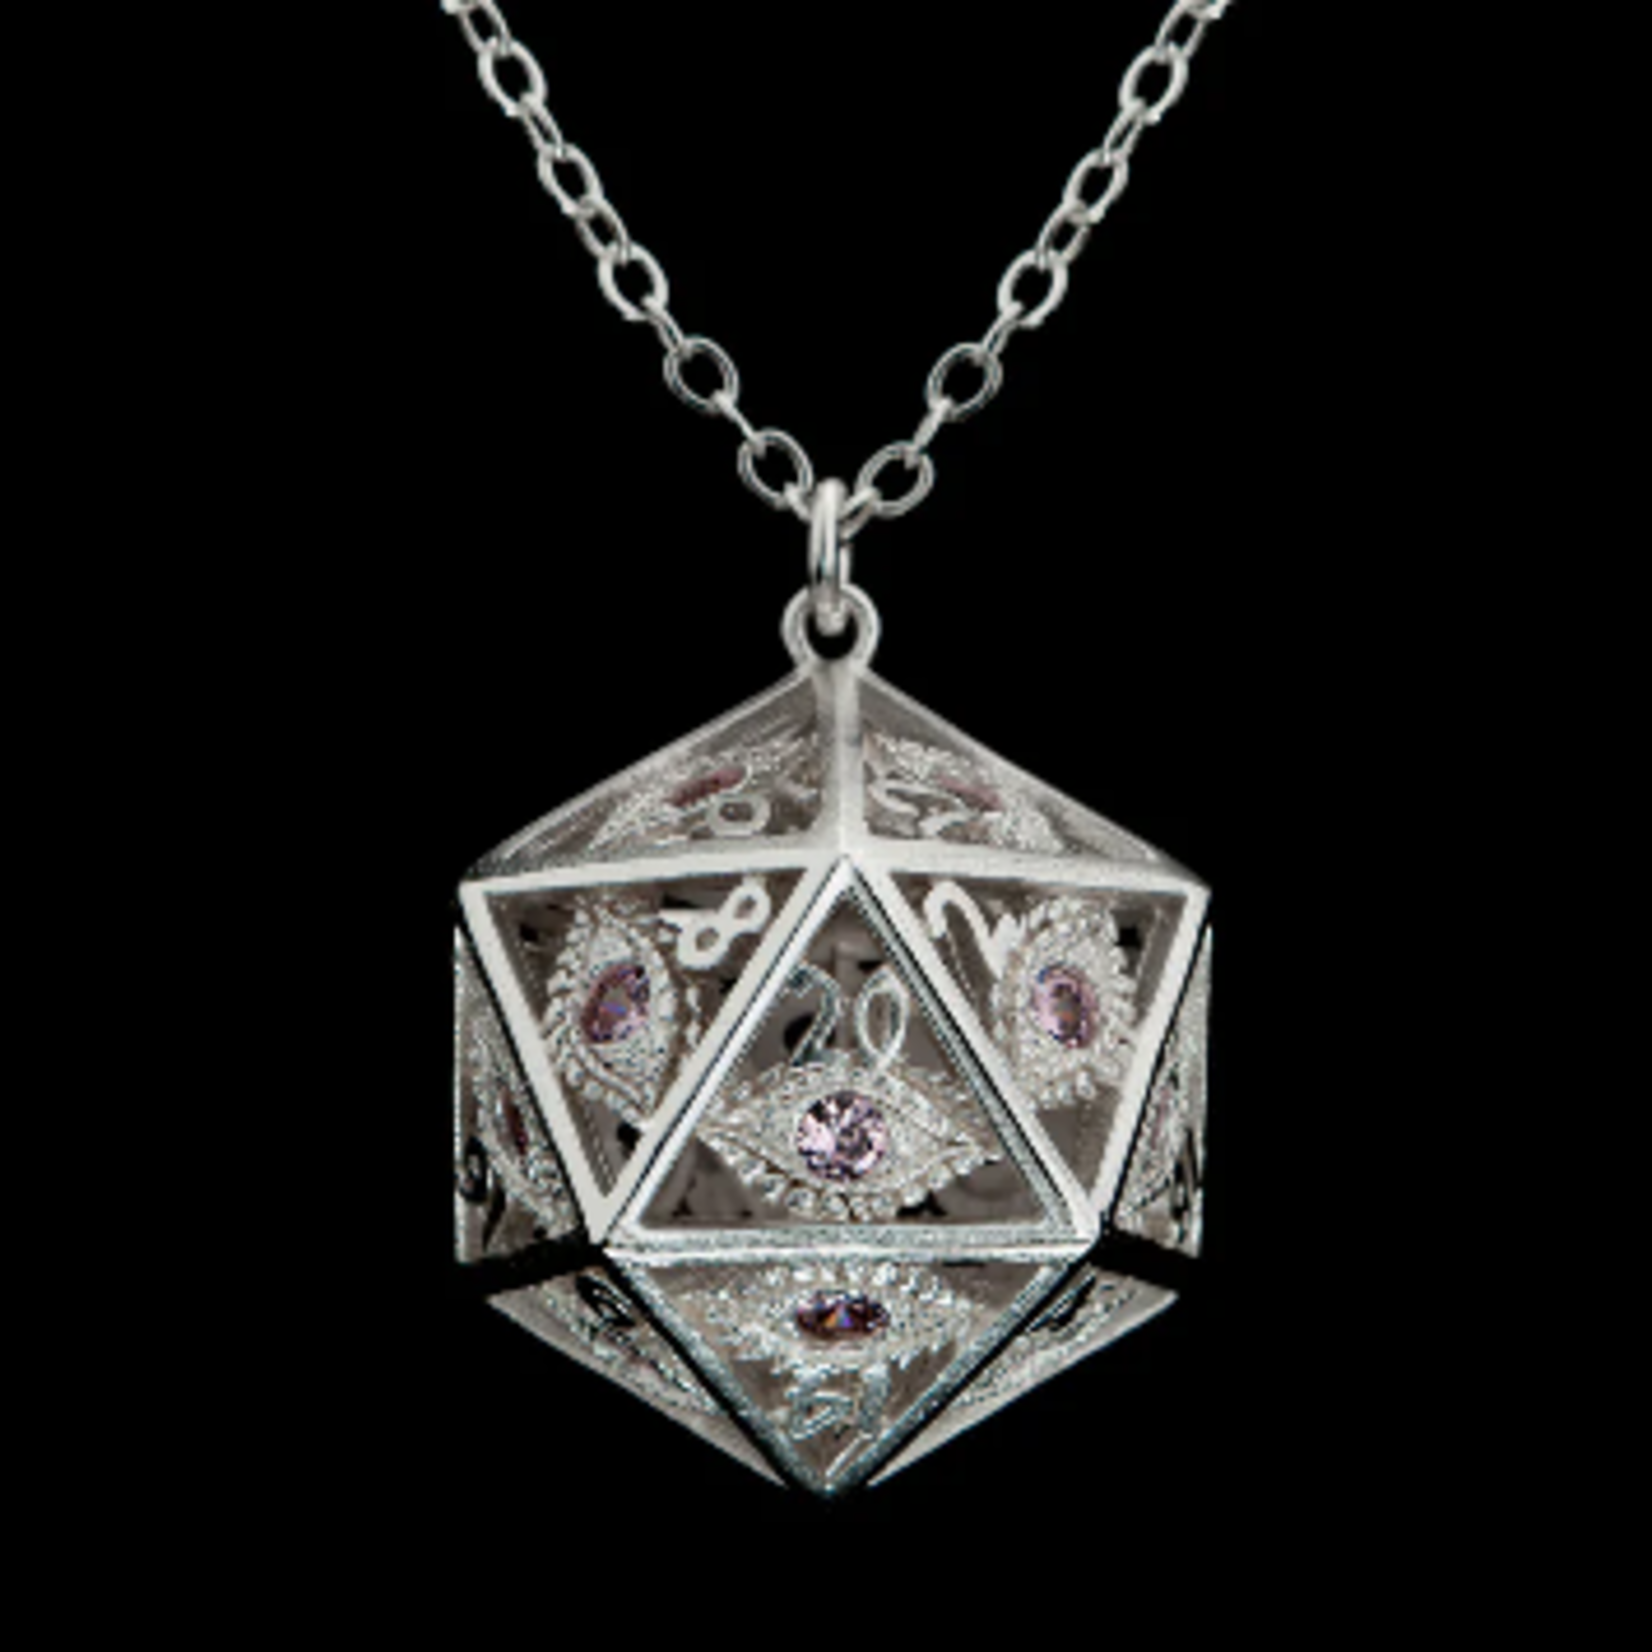 Dragon's Eye D20 Necklace - Silver with Pink Gems